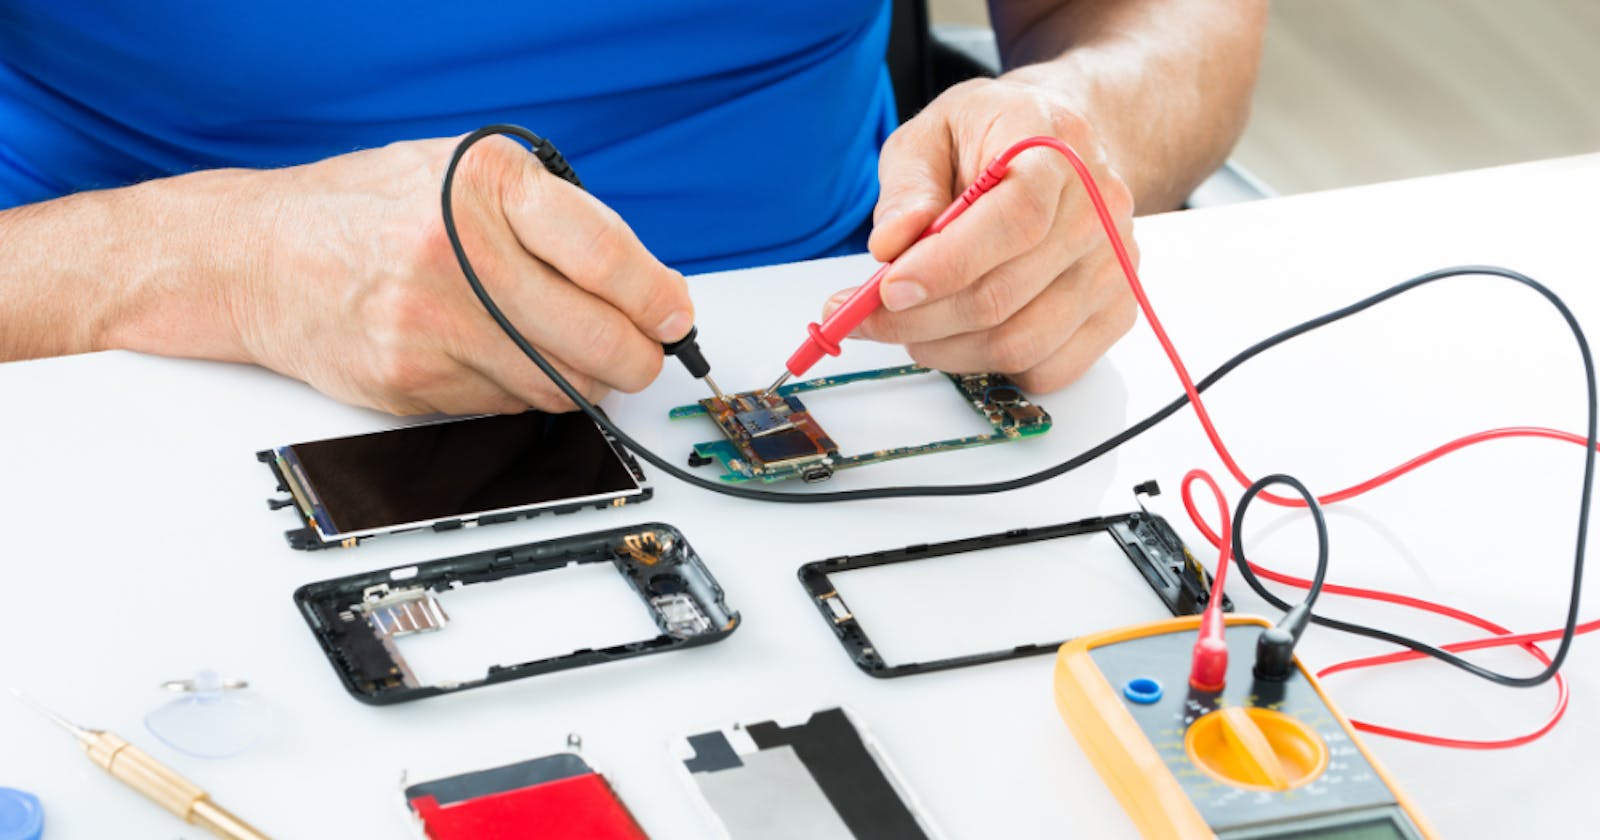 Pros and Cons of Cellphone Repair